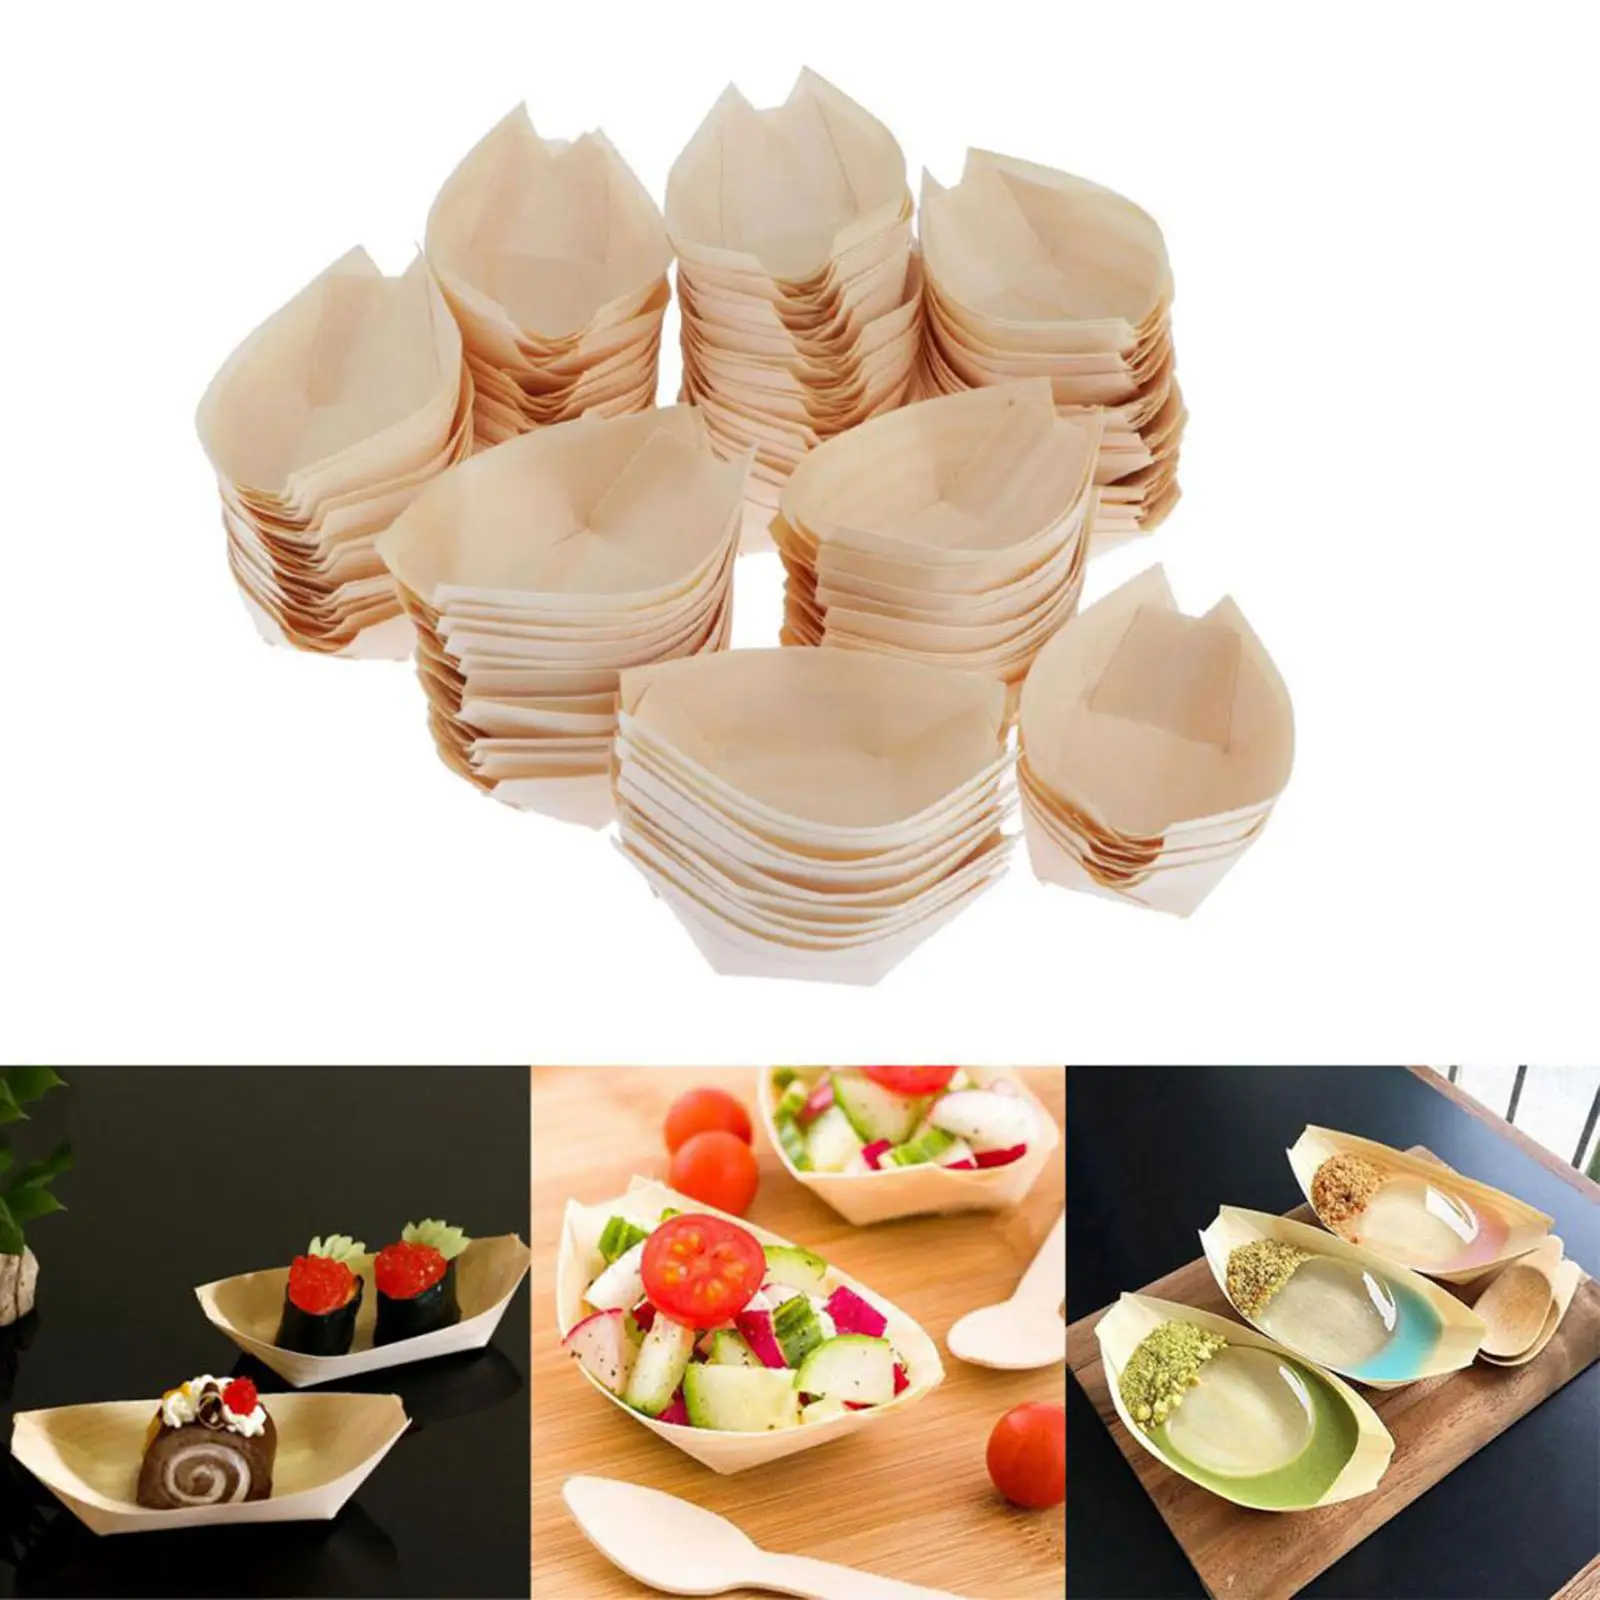 100 Pieces Wooden Sushi Boat, Disposable Sashimi Plate, Handmade Multipurpose Boat Food Container for Kitchen Restaurant Bar